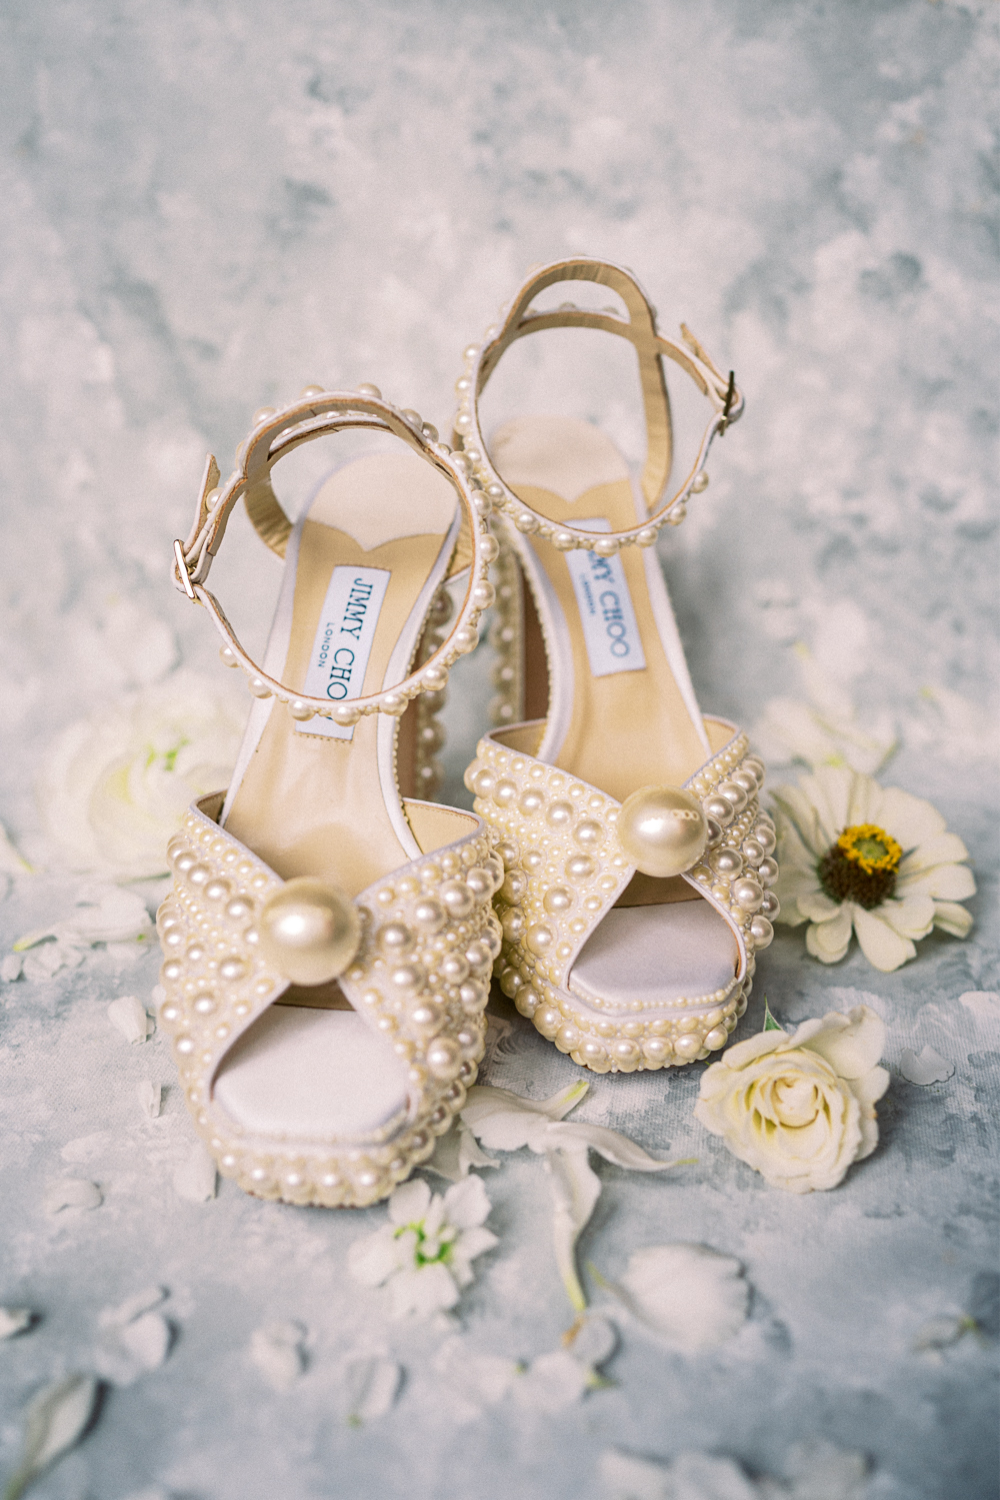 How to Photograph High End Wedding Details - Hunter and Sarah Photography